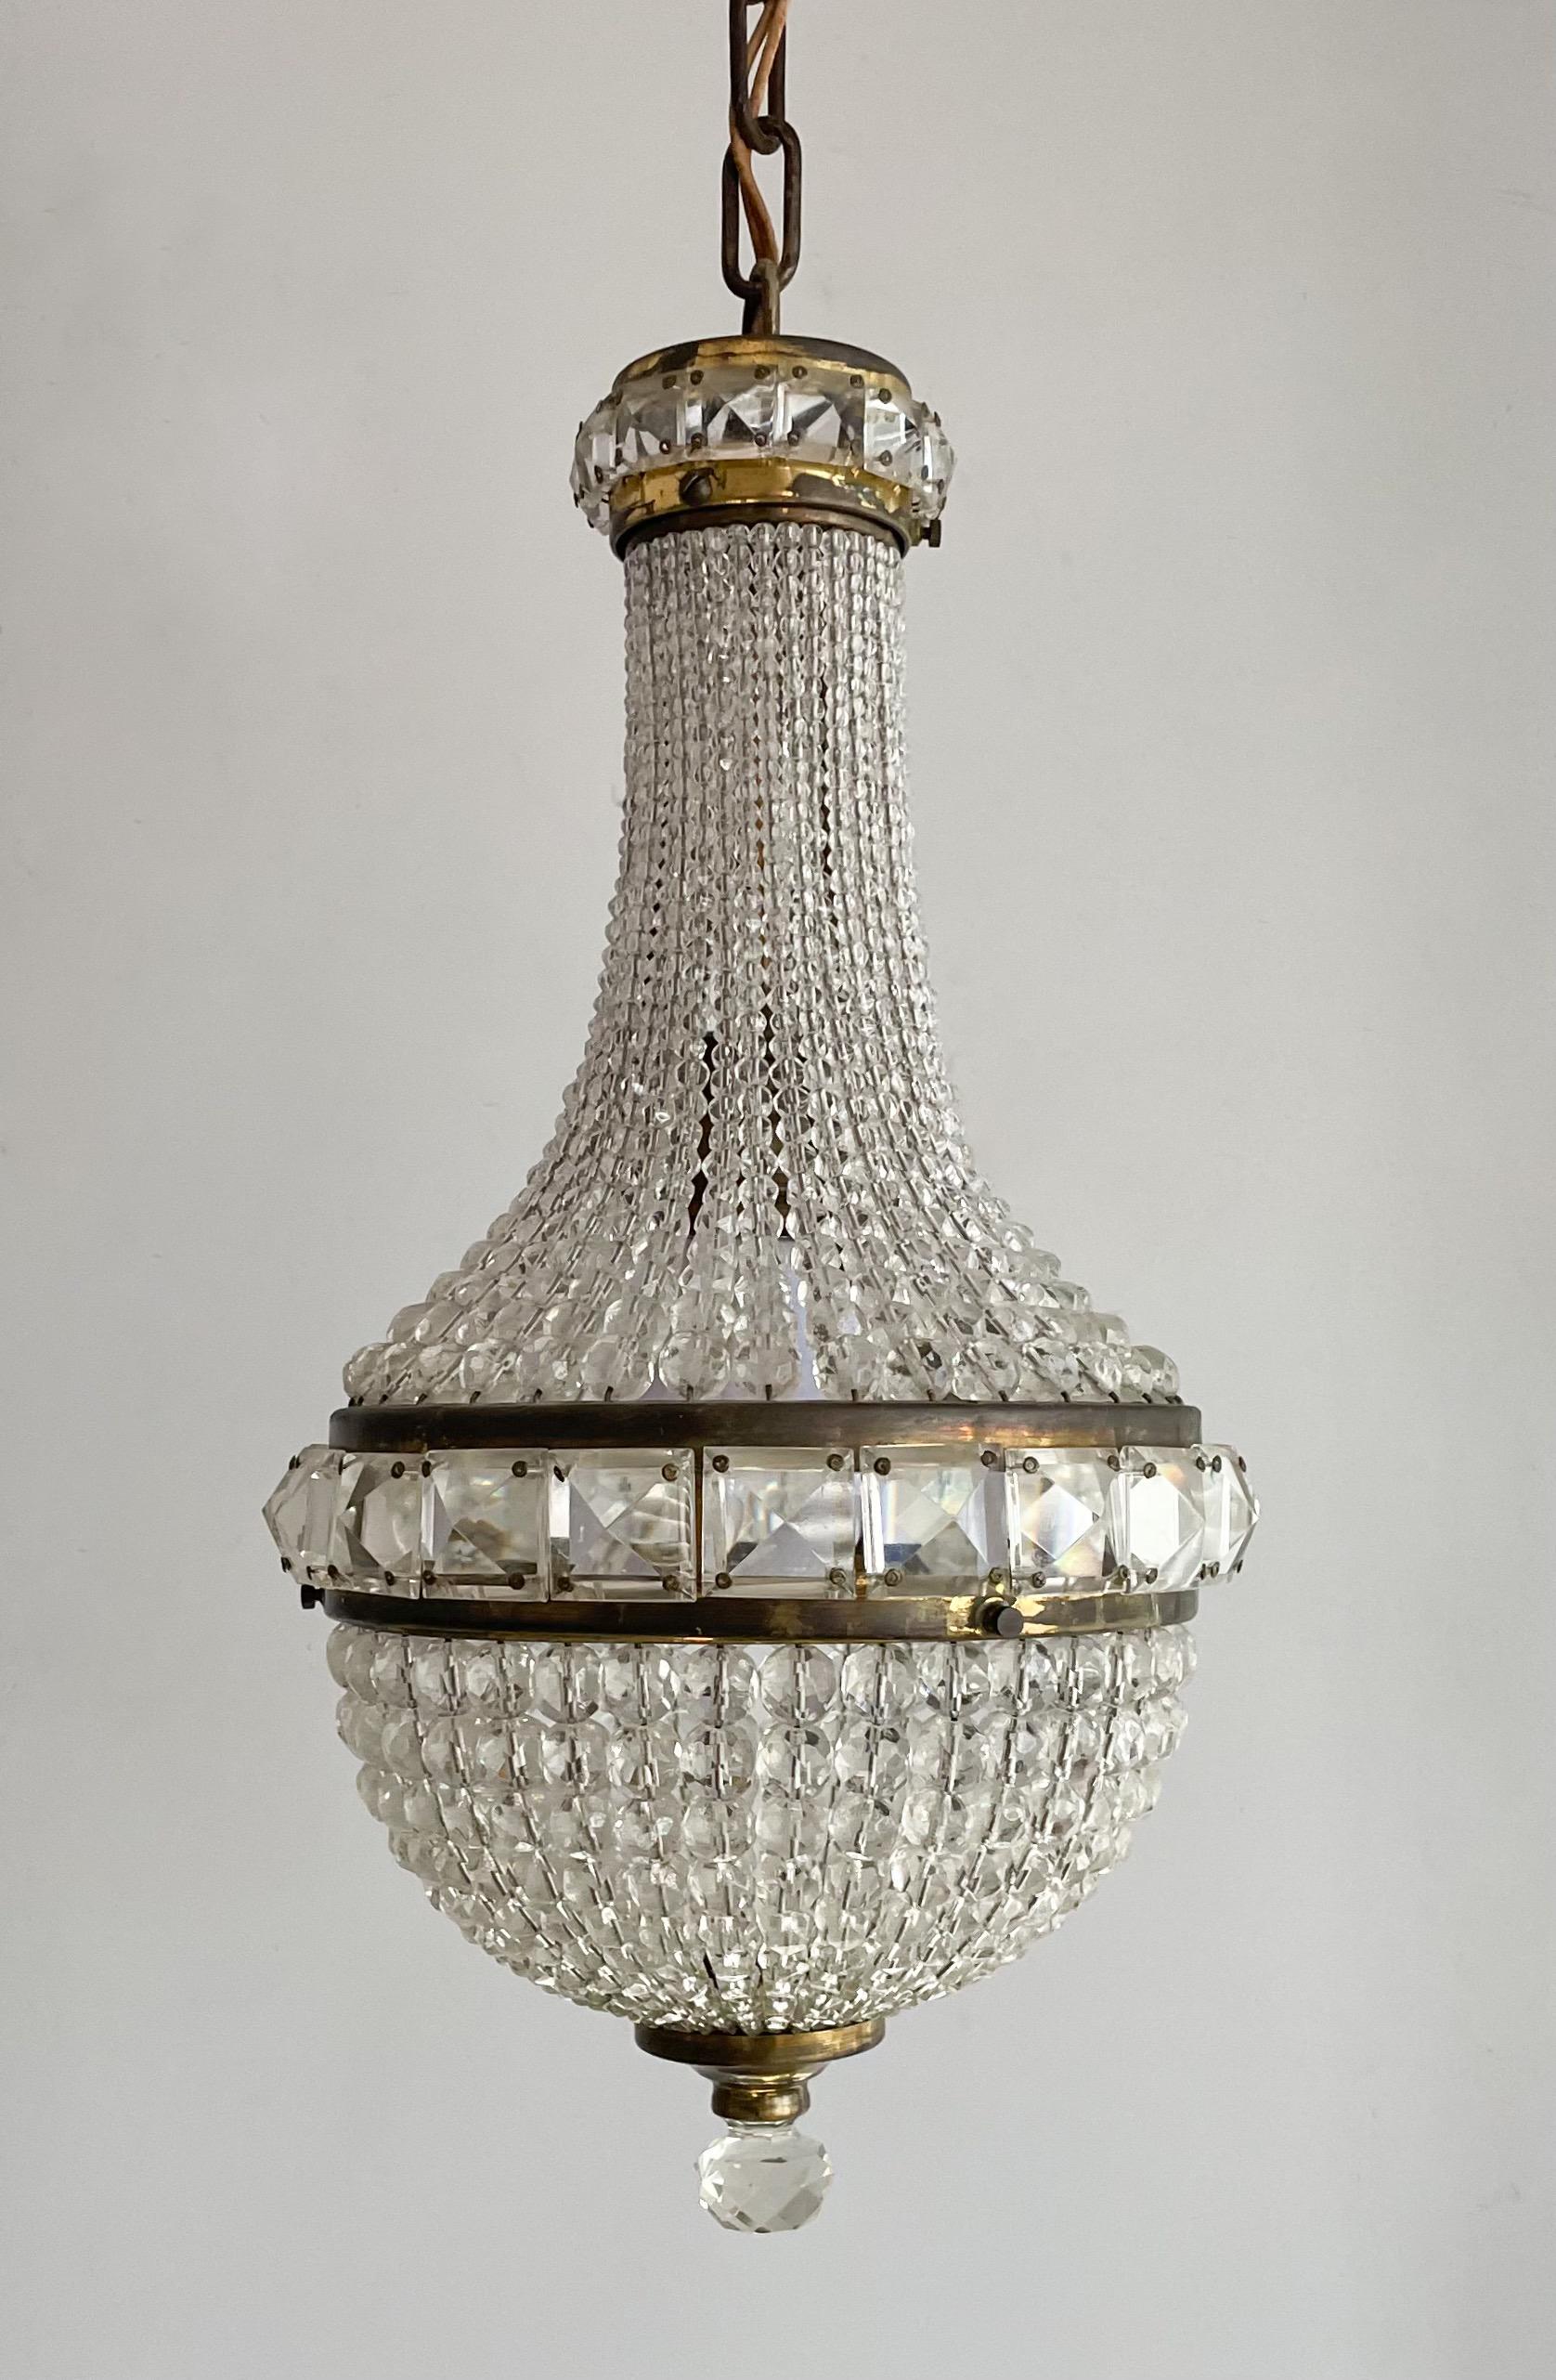 Gorgeous, Czech 1920s crystal beaded pendant chandelier in the neoclassical style.

The fixture consists of graduating glass beads secured by two brass, jeweled rings and a brass plate holding a faceted crystal ball at the bottom.

The chandelier is